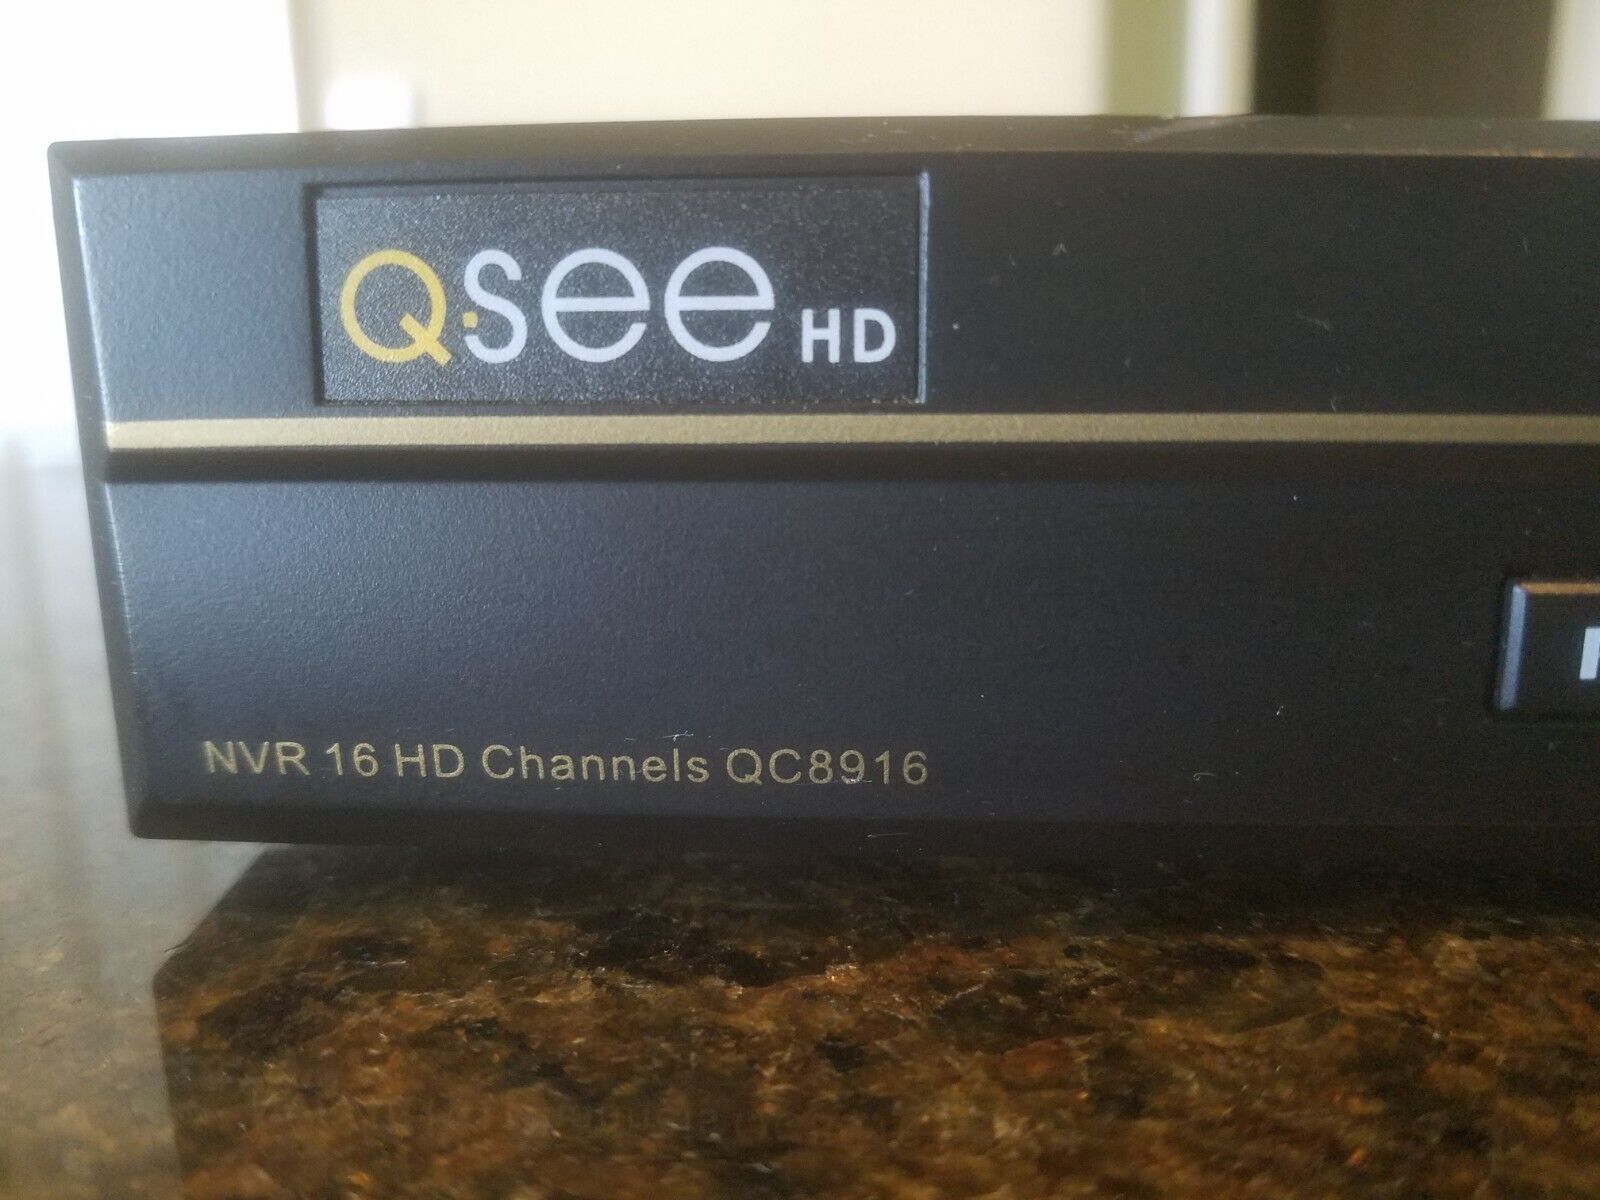 Q-see Hd Nvr 16 Hd Channels Model Qc8916 Preowned In Euc Tested